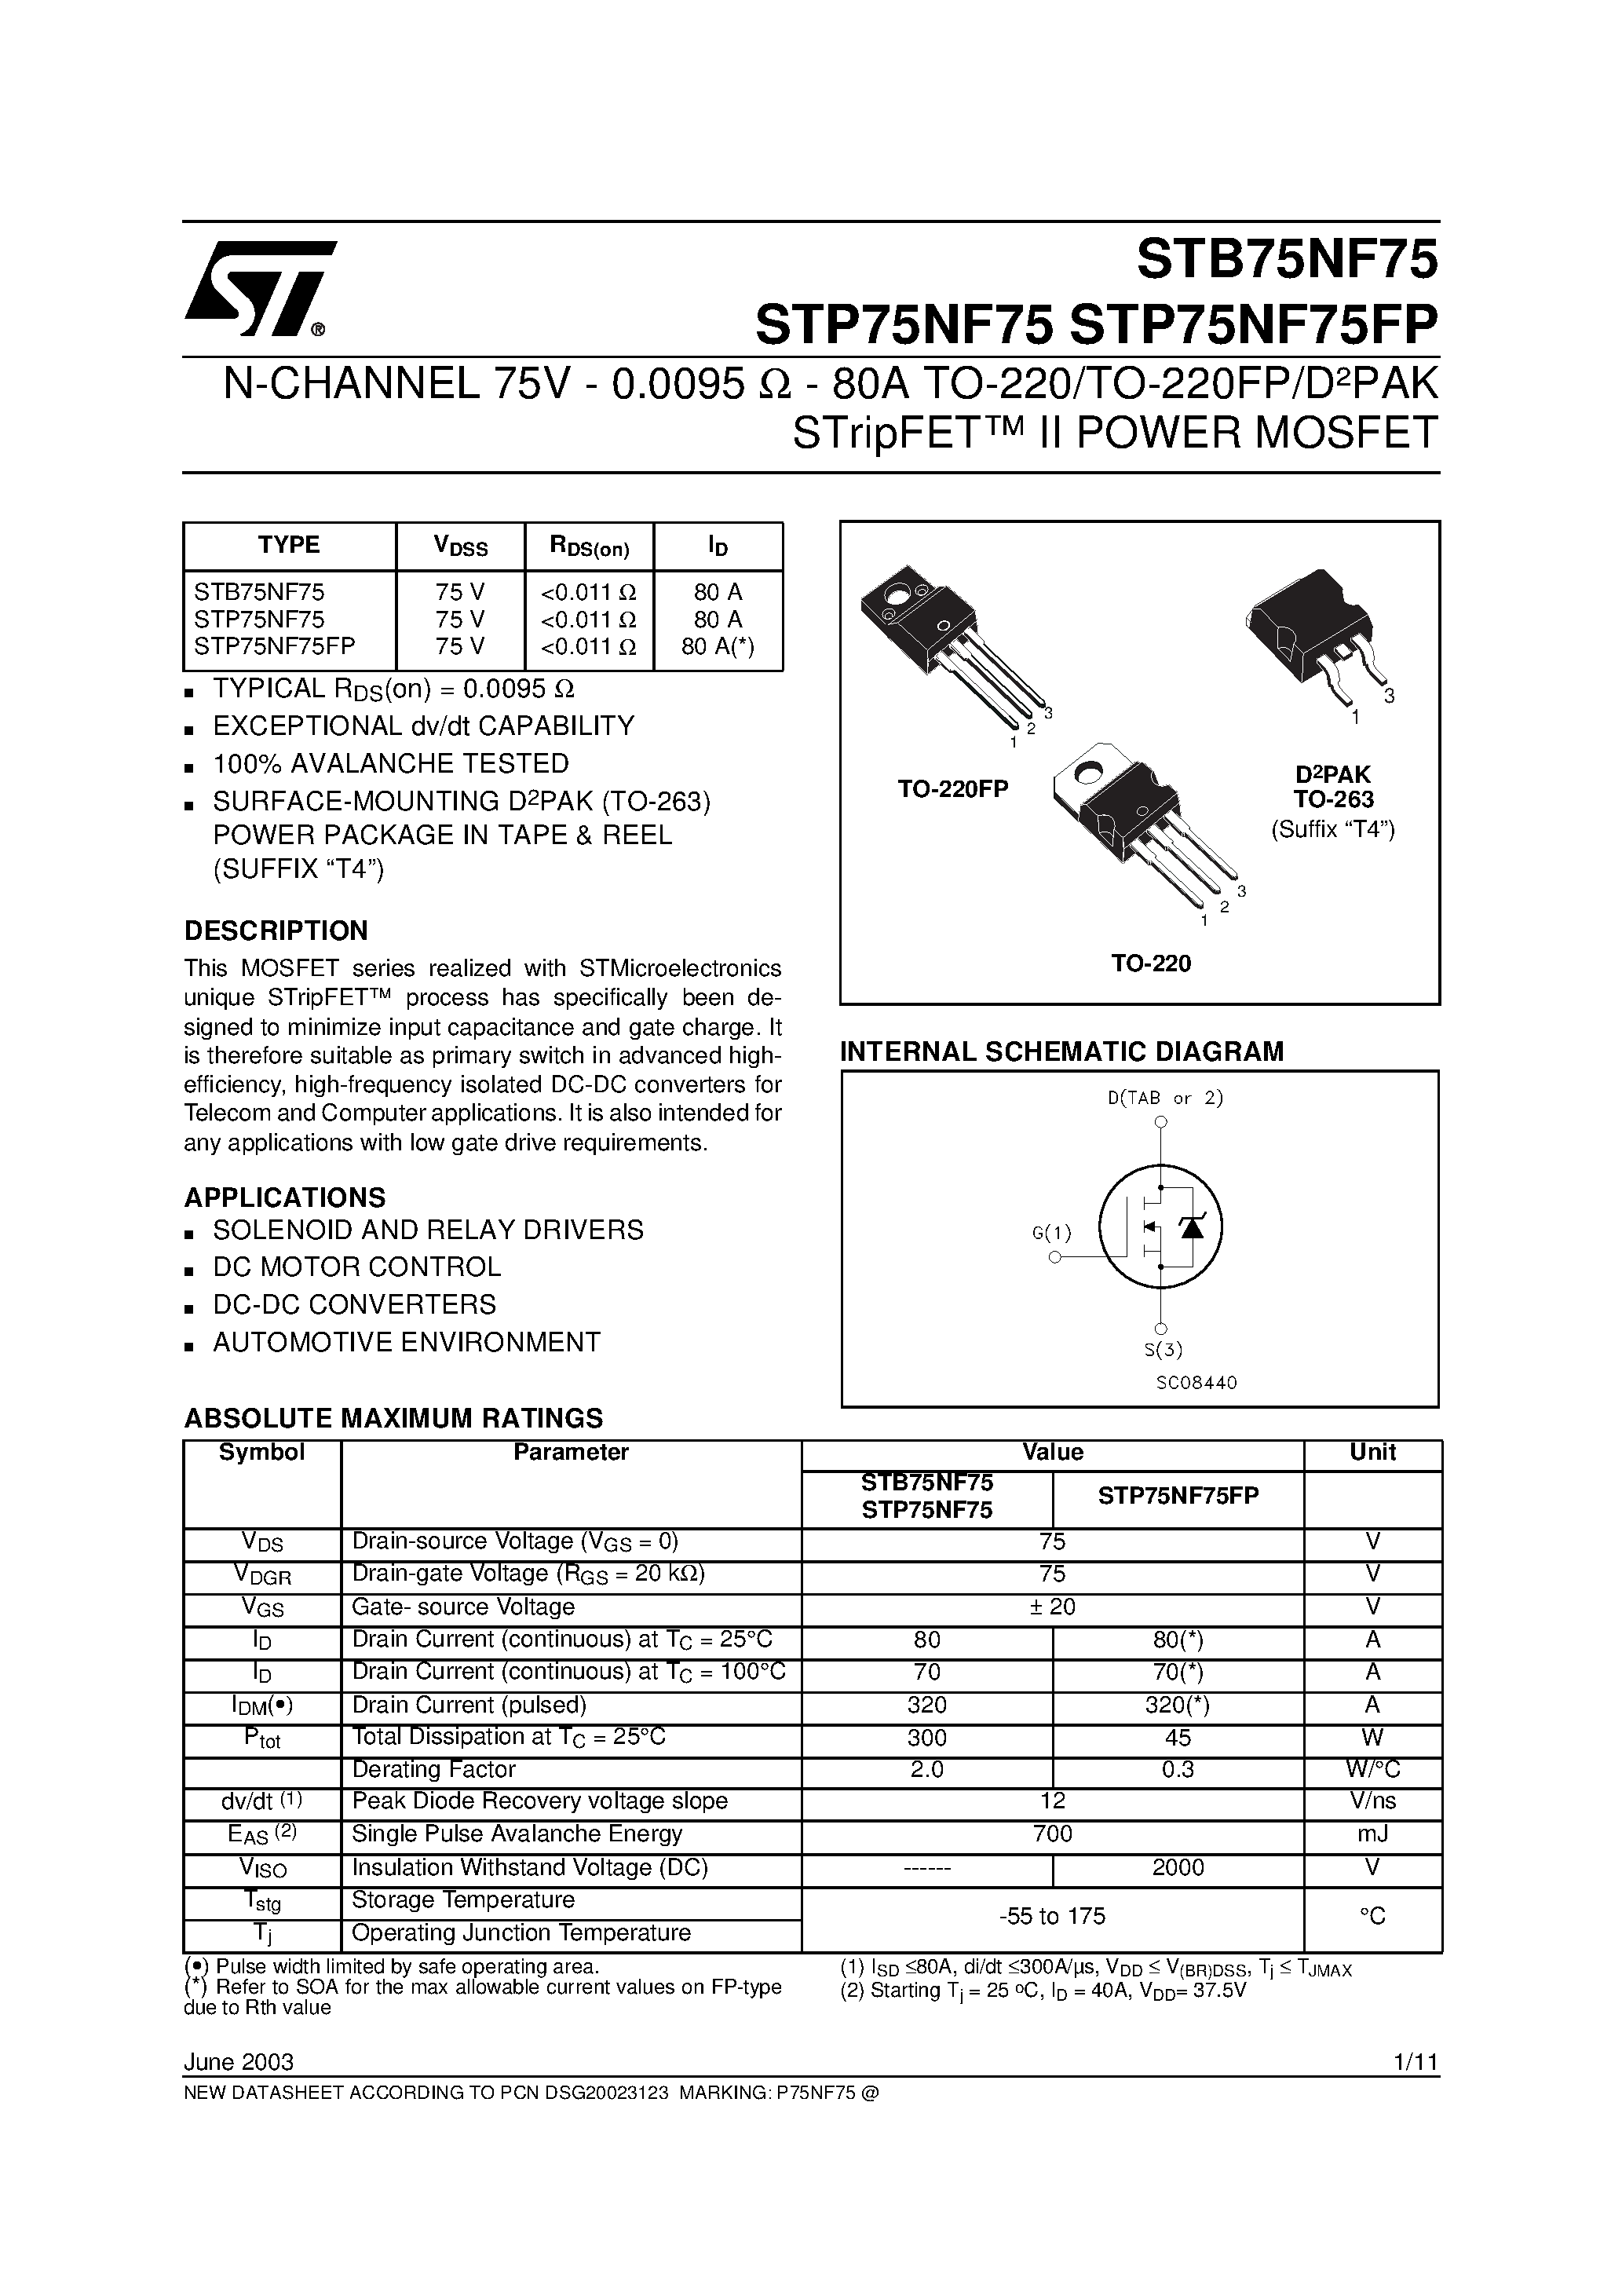 Даташит STB75NF75 - N-CHANNEL MOSFET страница 1